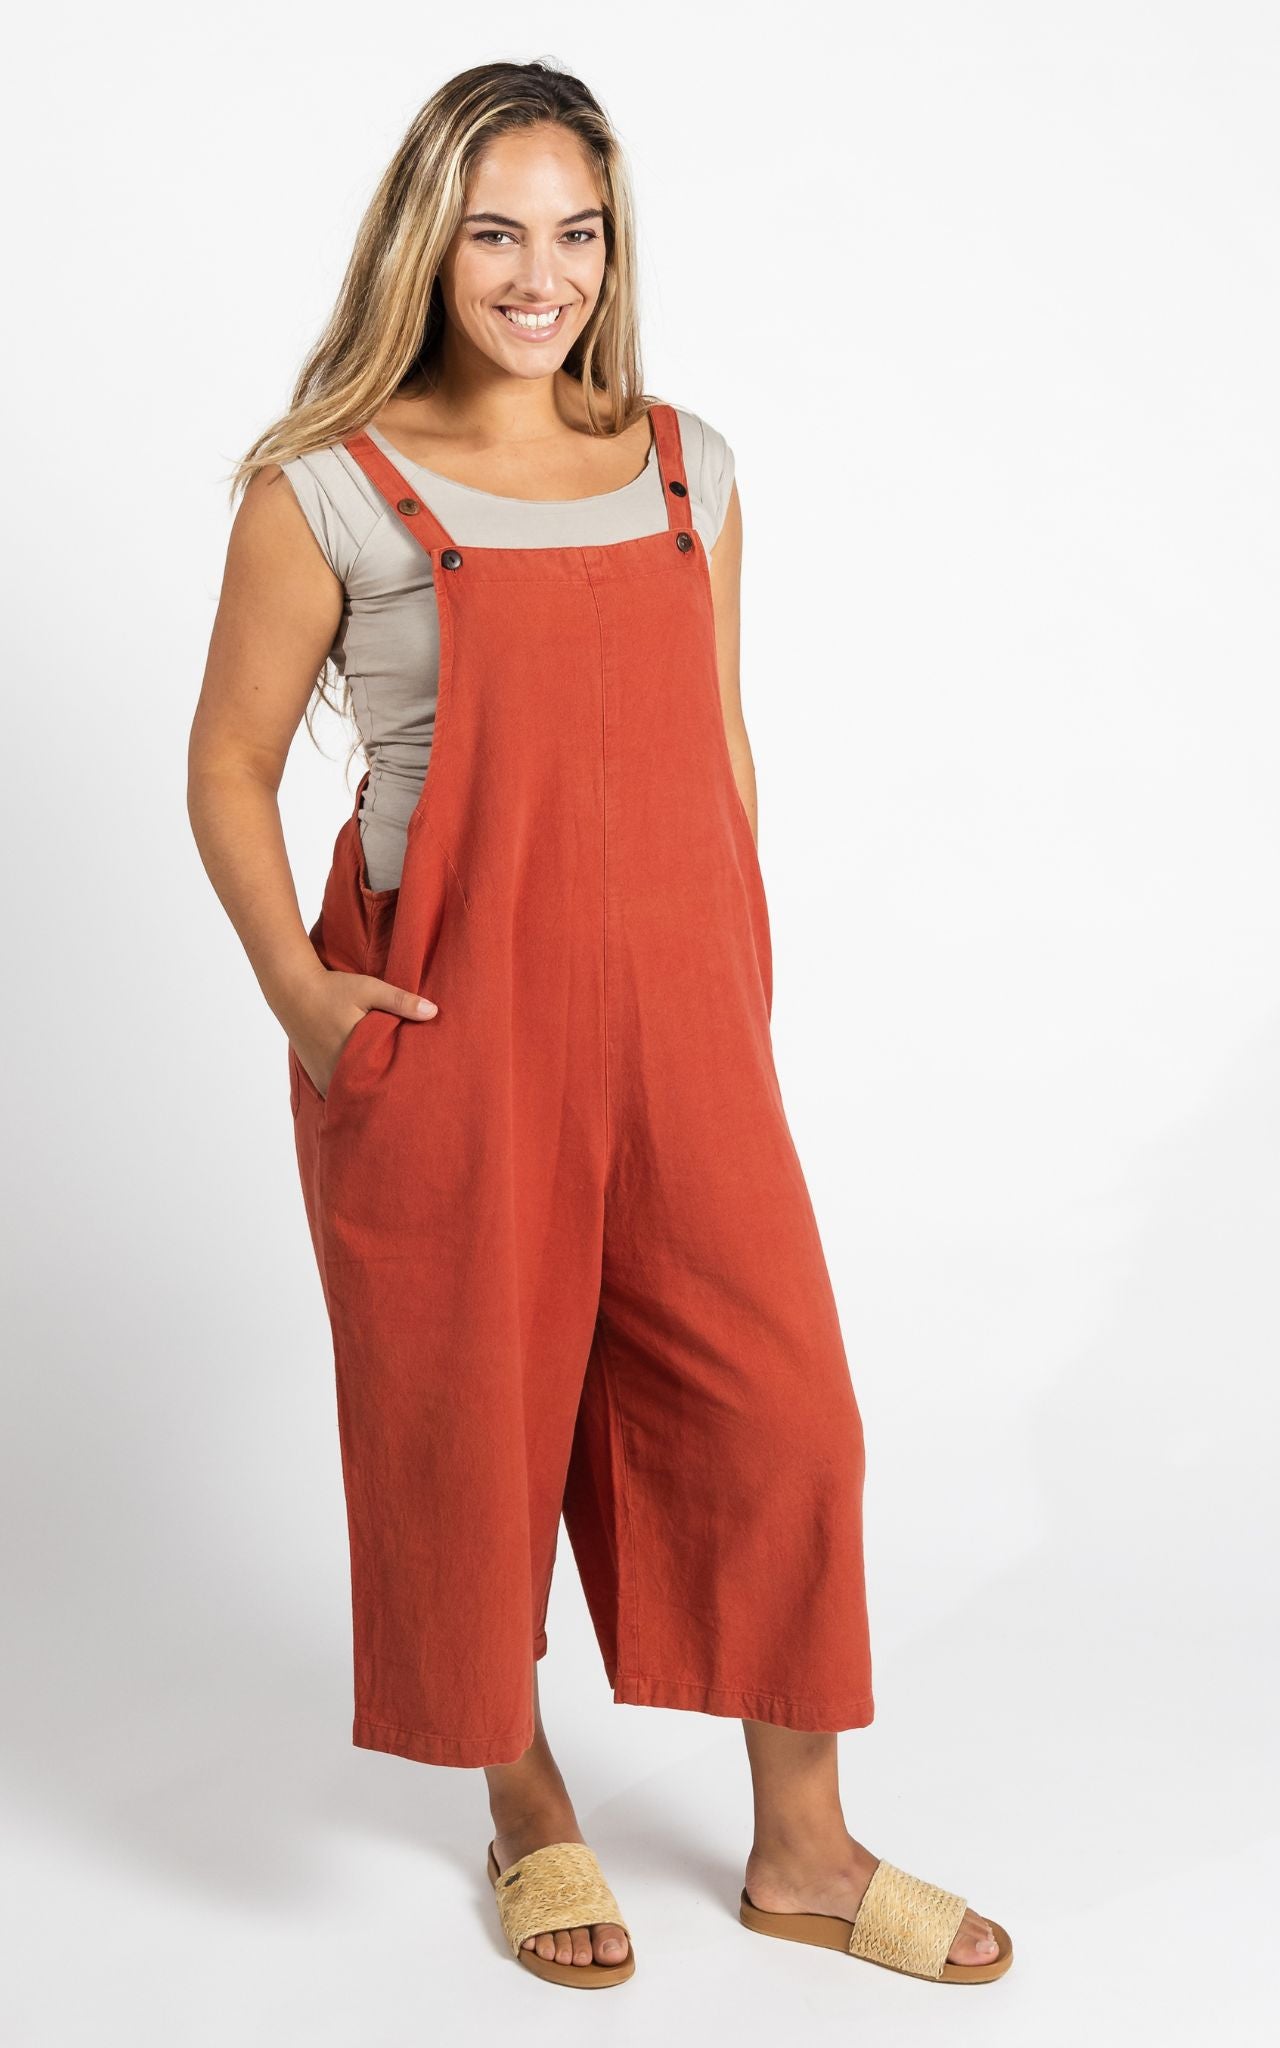 Surya Australia Ethical Cotton Loose Baggy 'Juanita' Overalls from Nepal - Rust